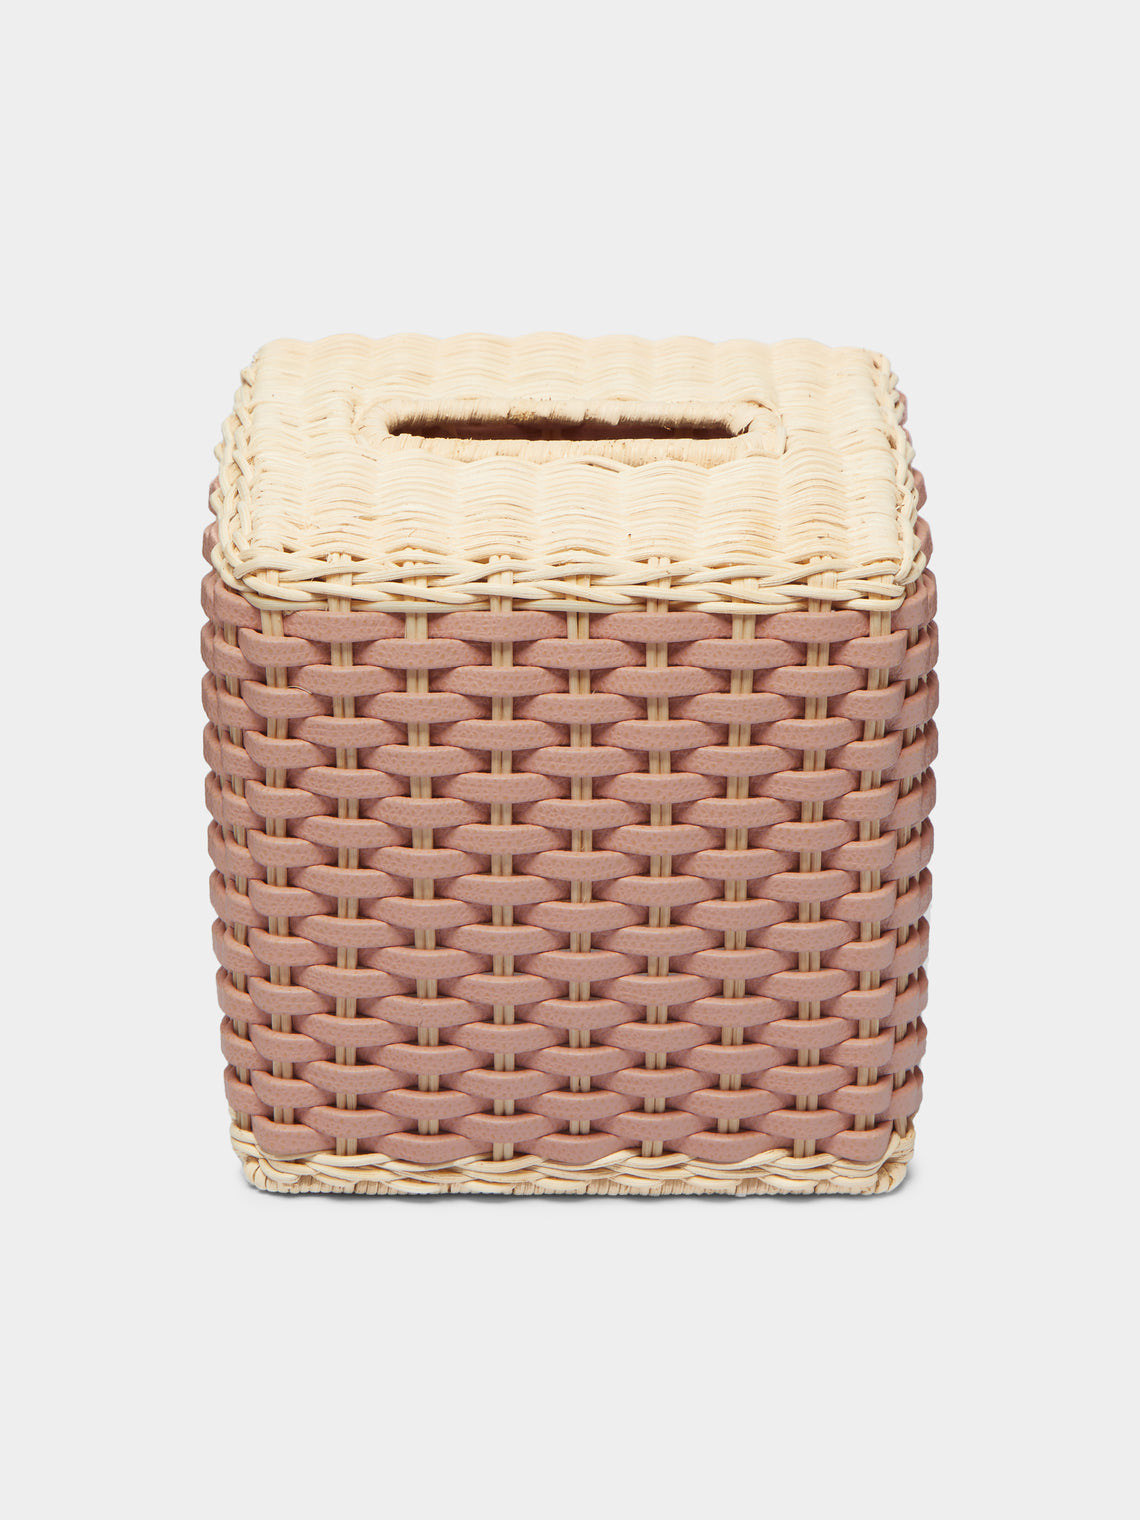 Giobagnara - Antibes Handwoven Leather and Rattan Tissue Box -  - ABASK